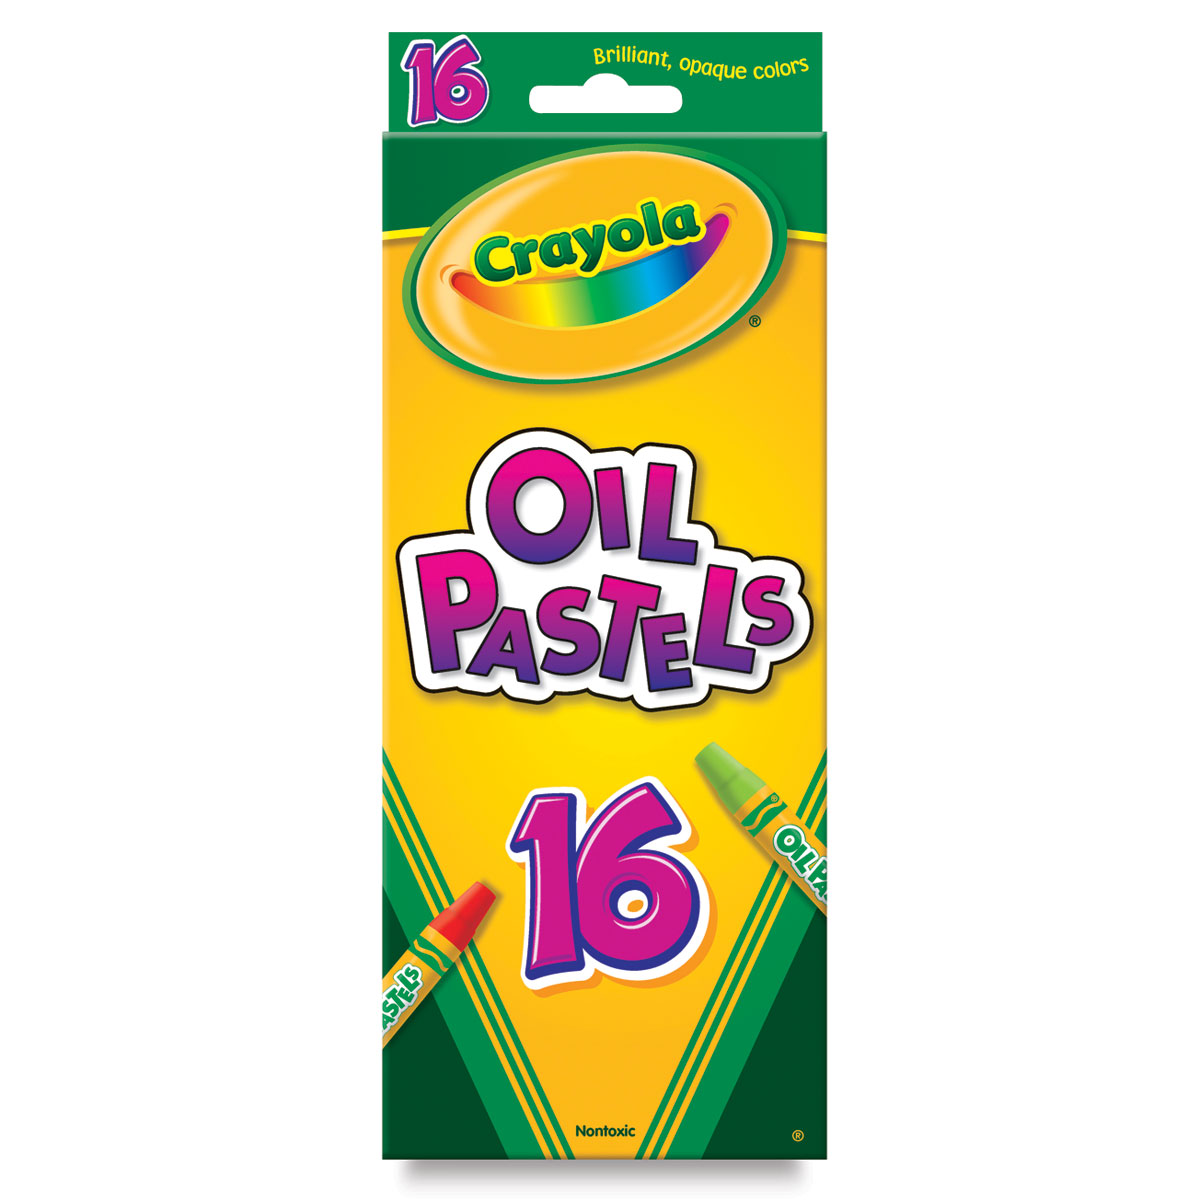 Crayola - Unbox your brilliant colored Crayola Oil Pastels apply that  smoothly! #crayolaph #colors #Oilpastel #art